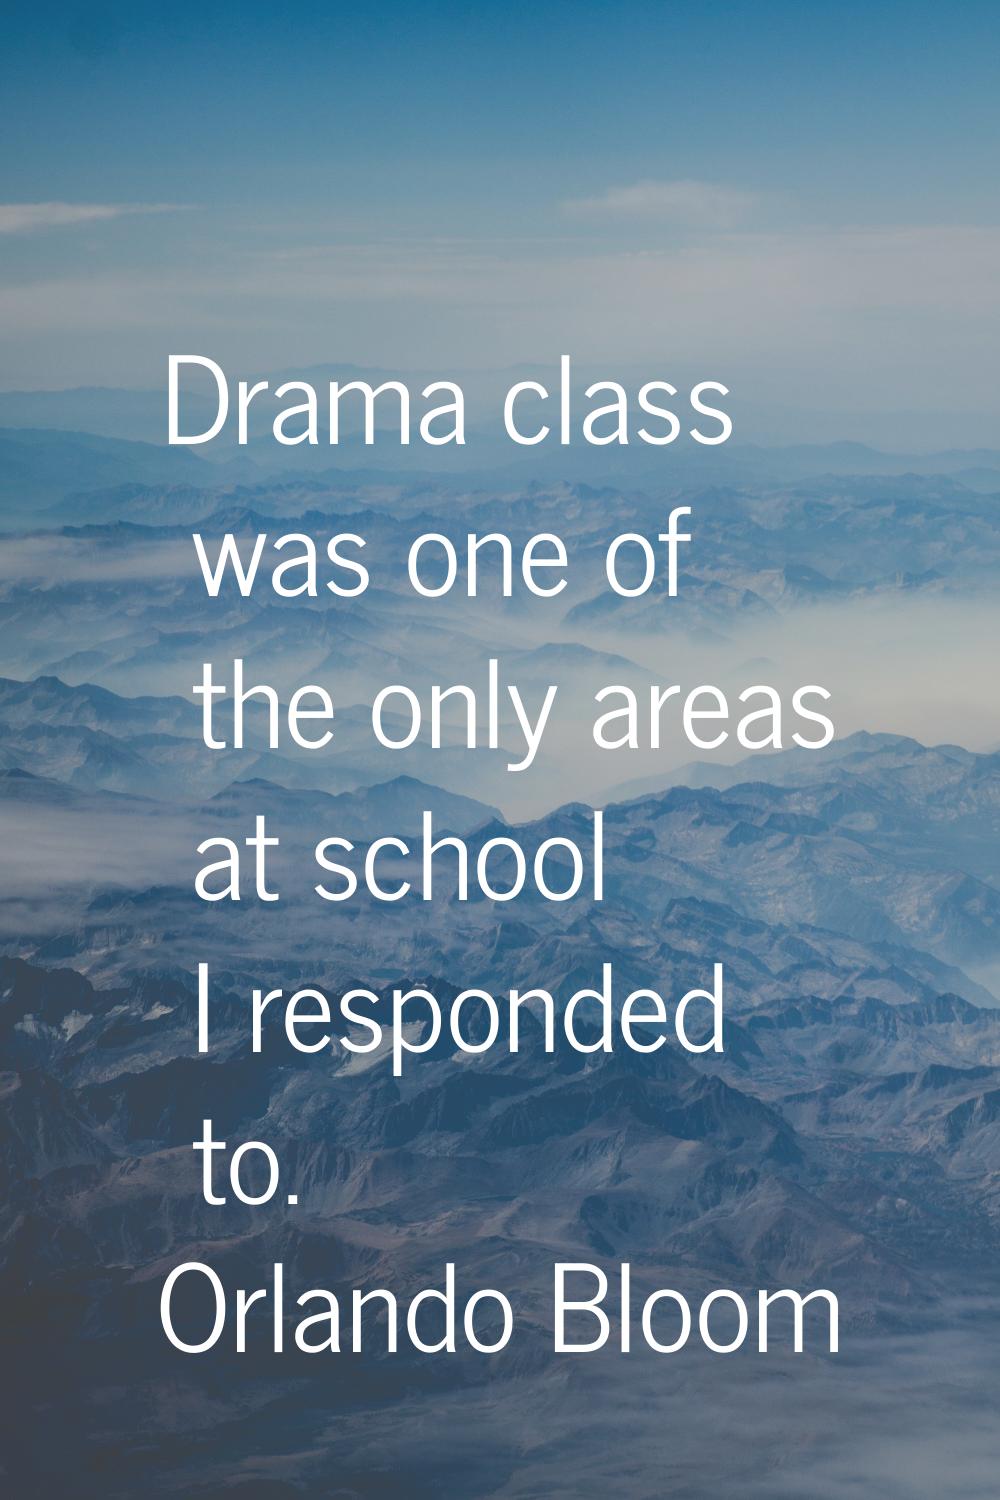 Drama class was one of the only areas at school I responded to.